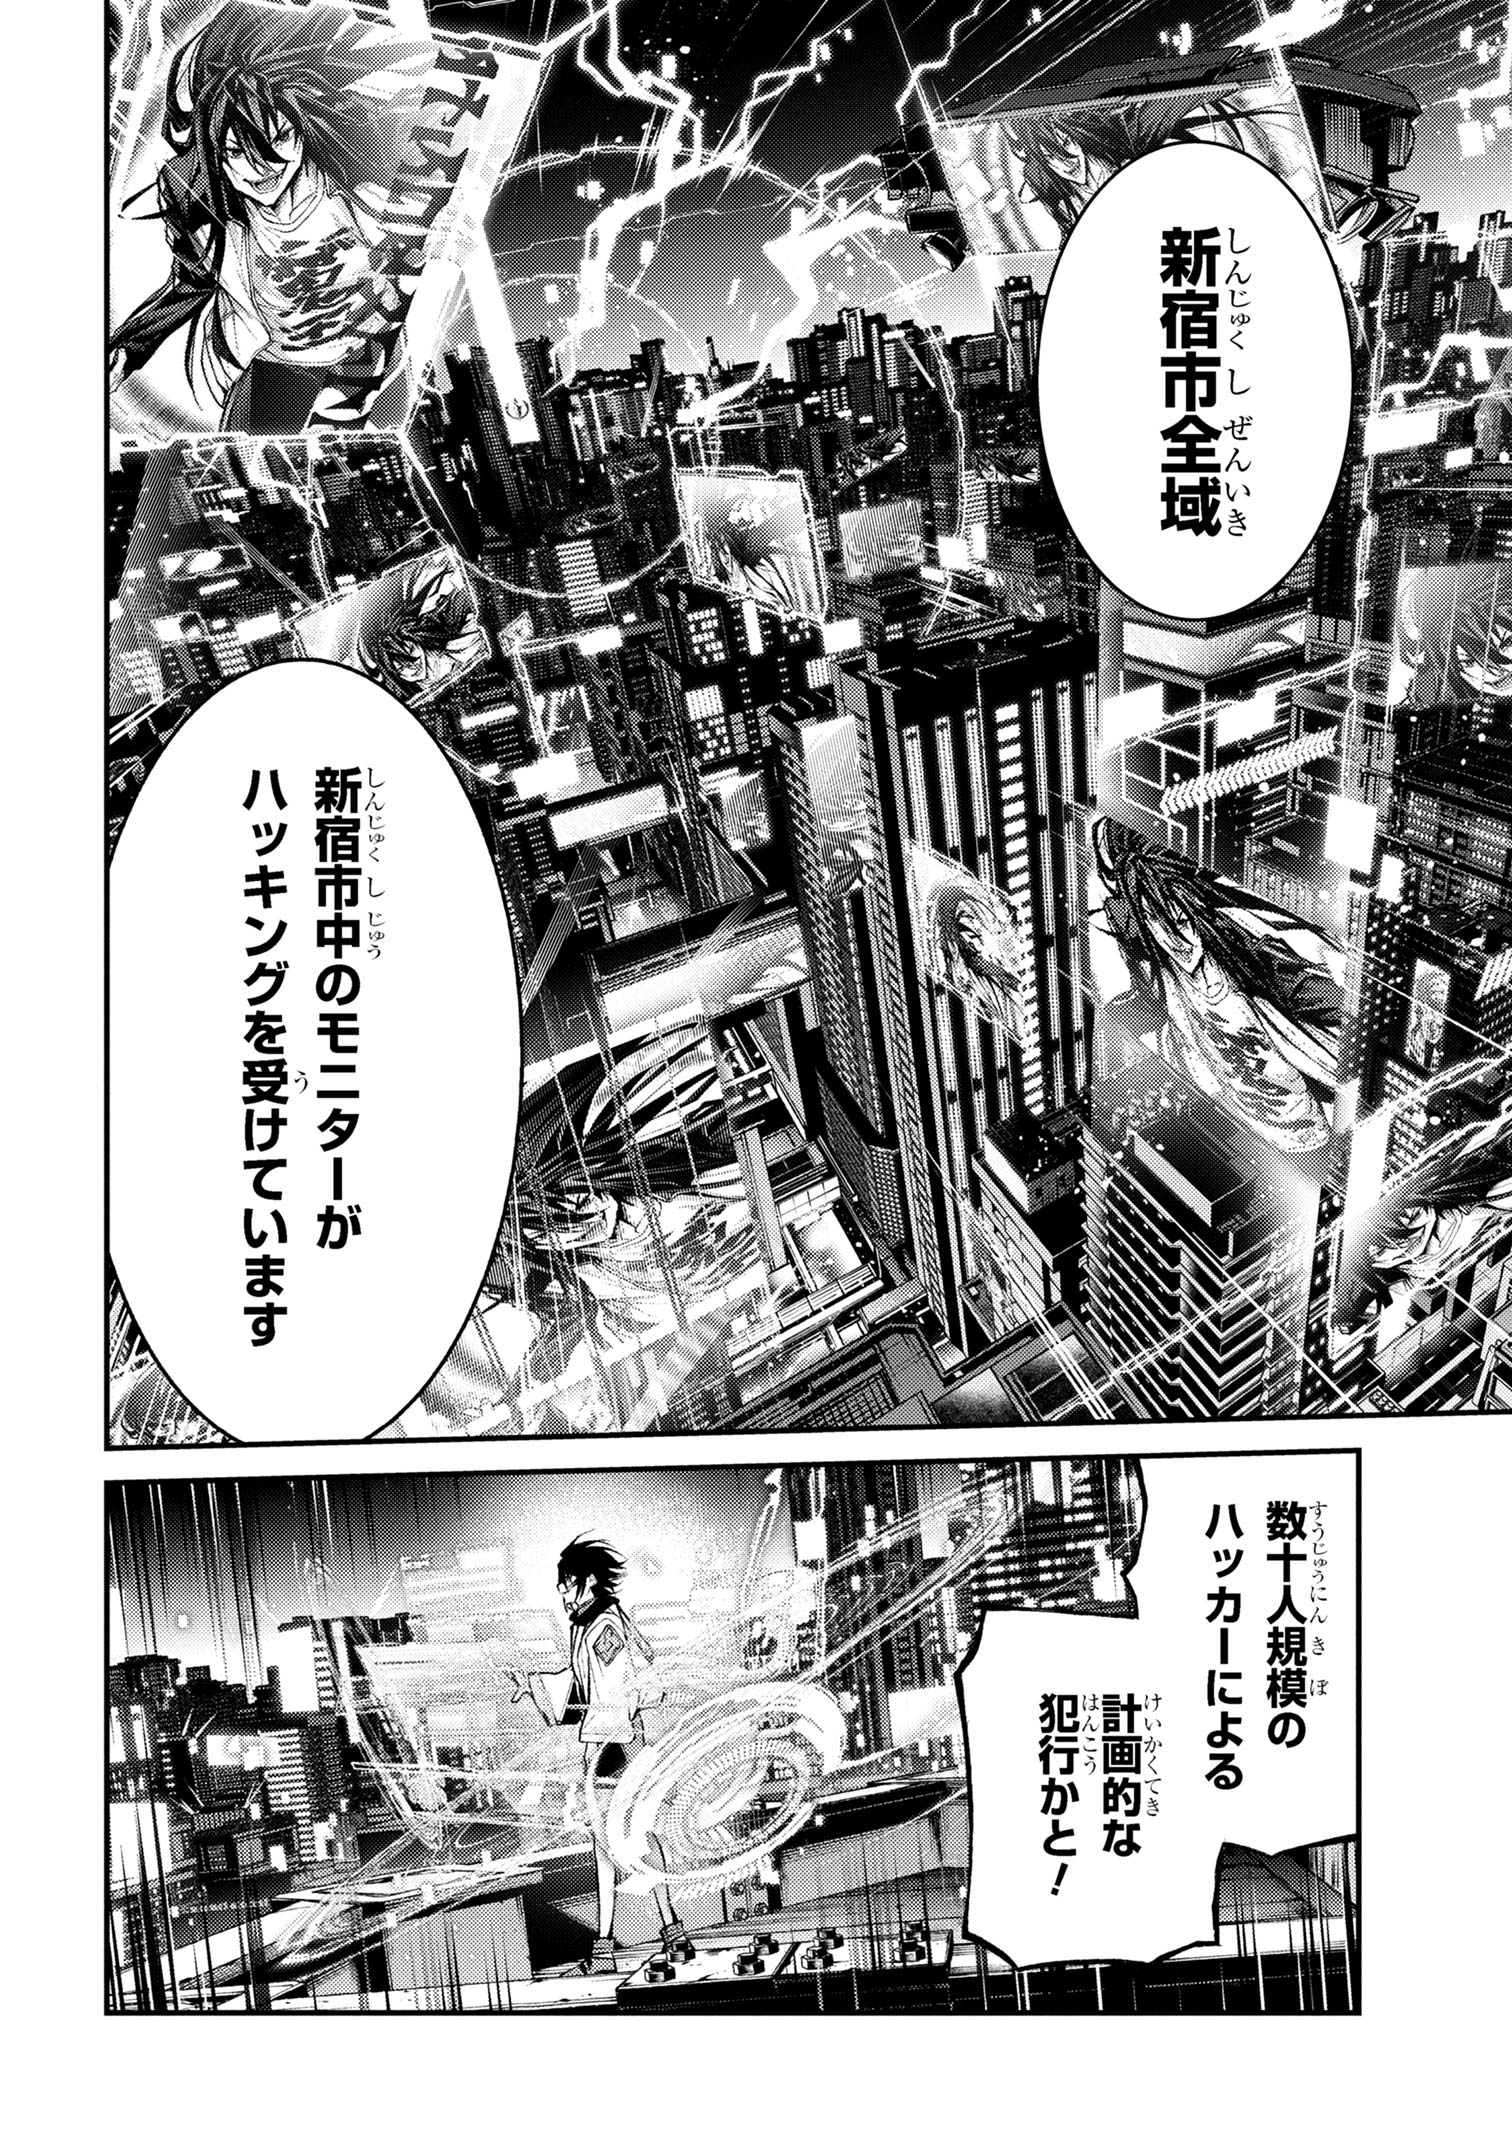 Maou 2099 - Chapter 13.2 - Page 5